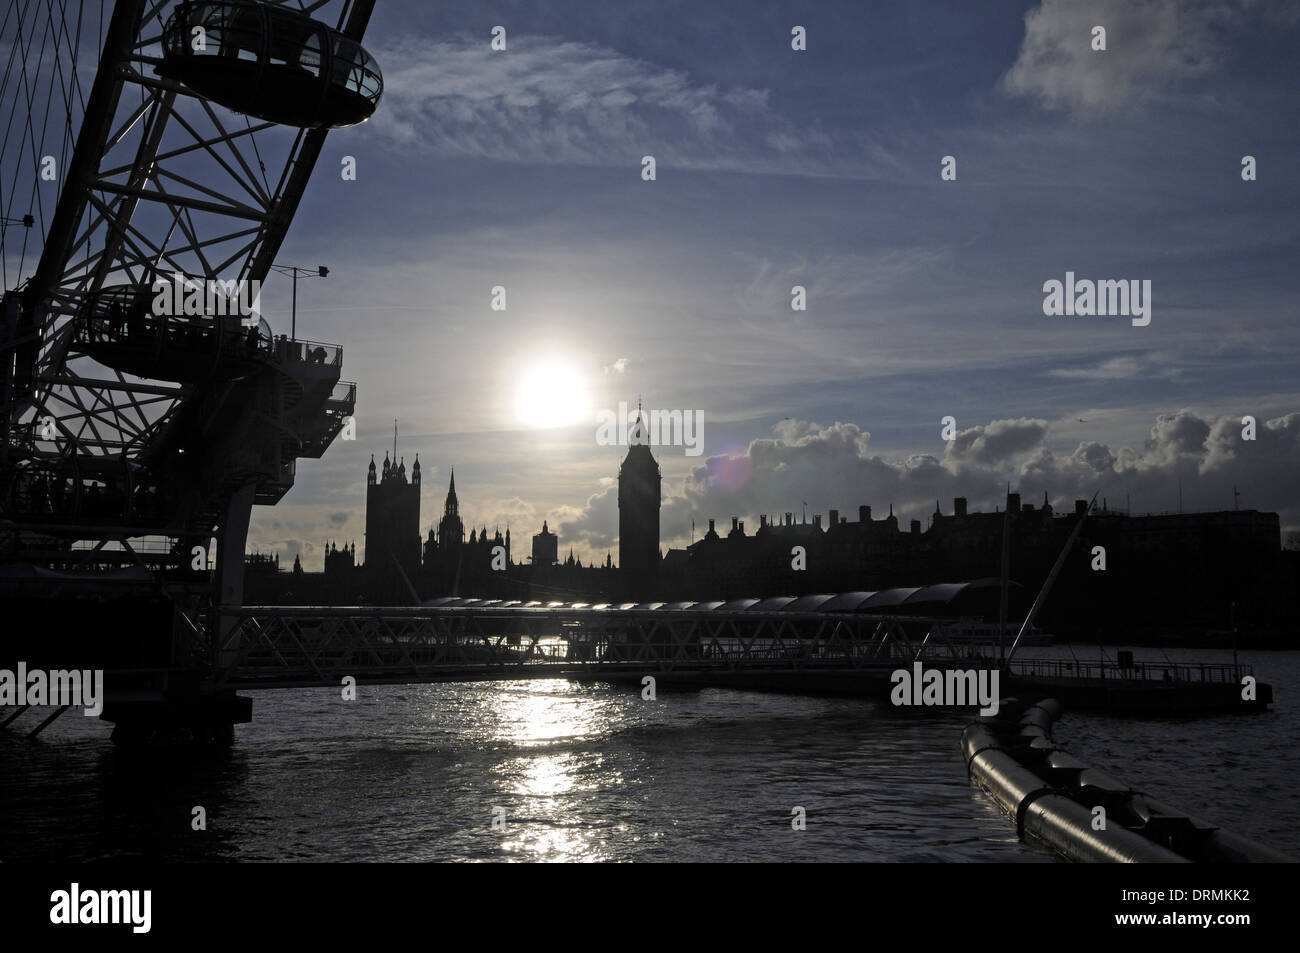 The London Eye River Thames and Houses of Parliament with Big Ben and Westminster Bridge London England Stock Photo